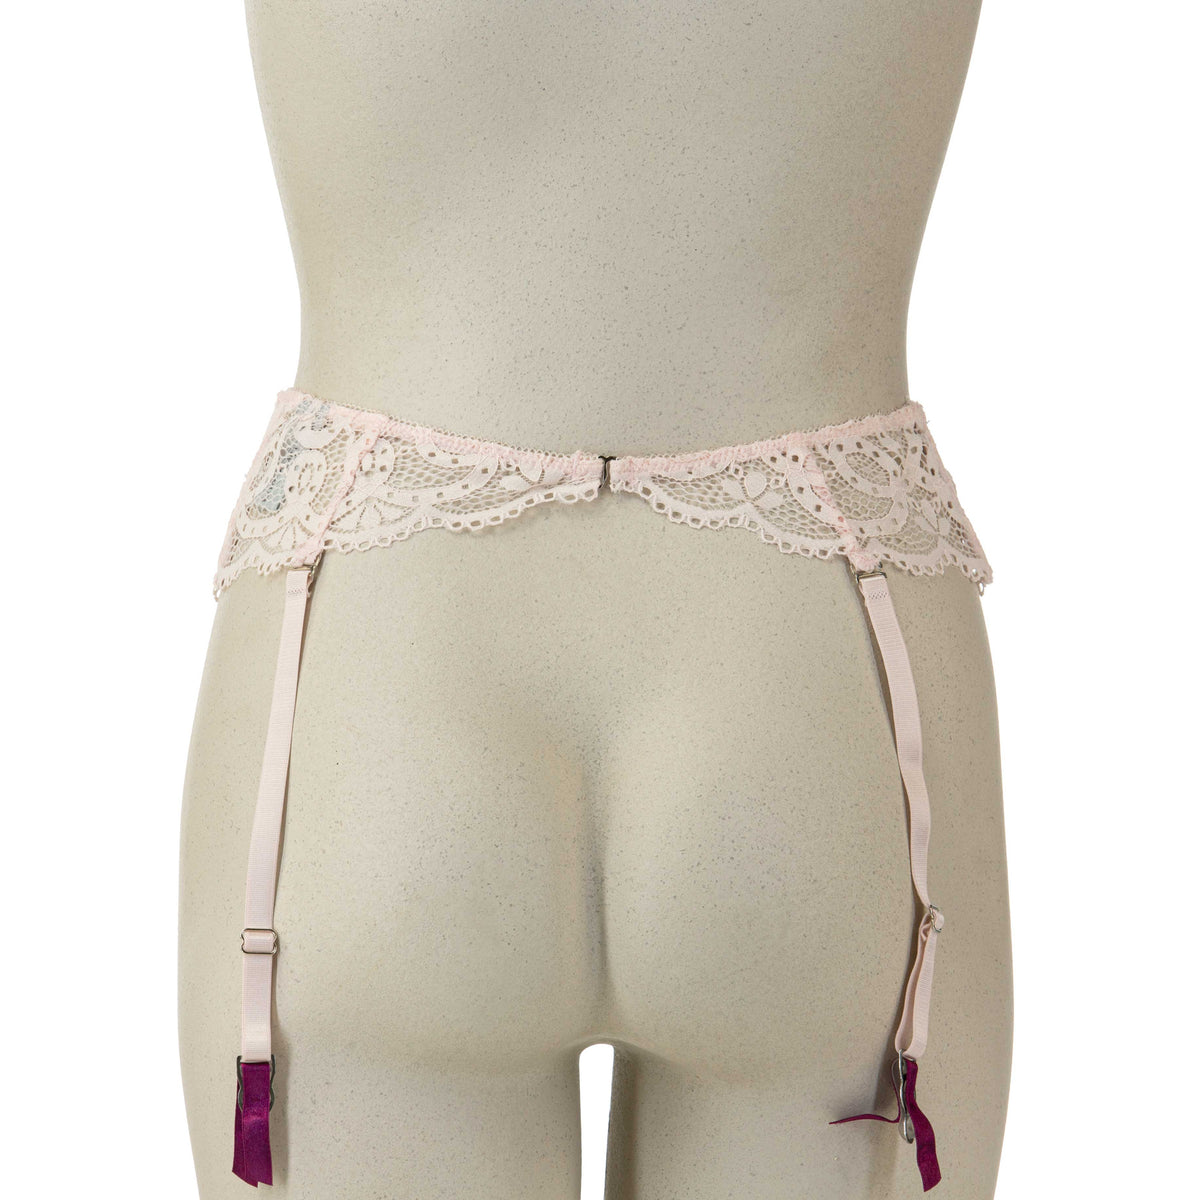 Sophie B - Delicate Lace Garter - Pink - Small